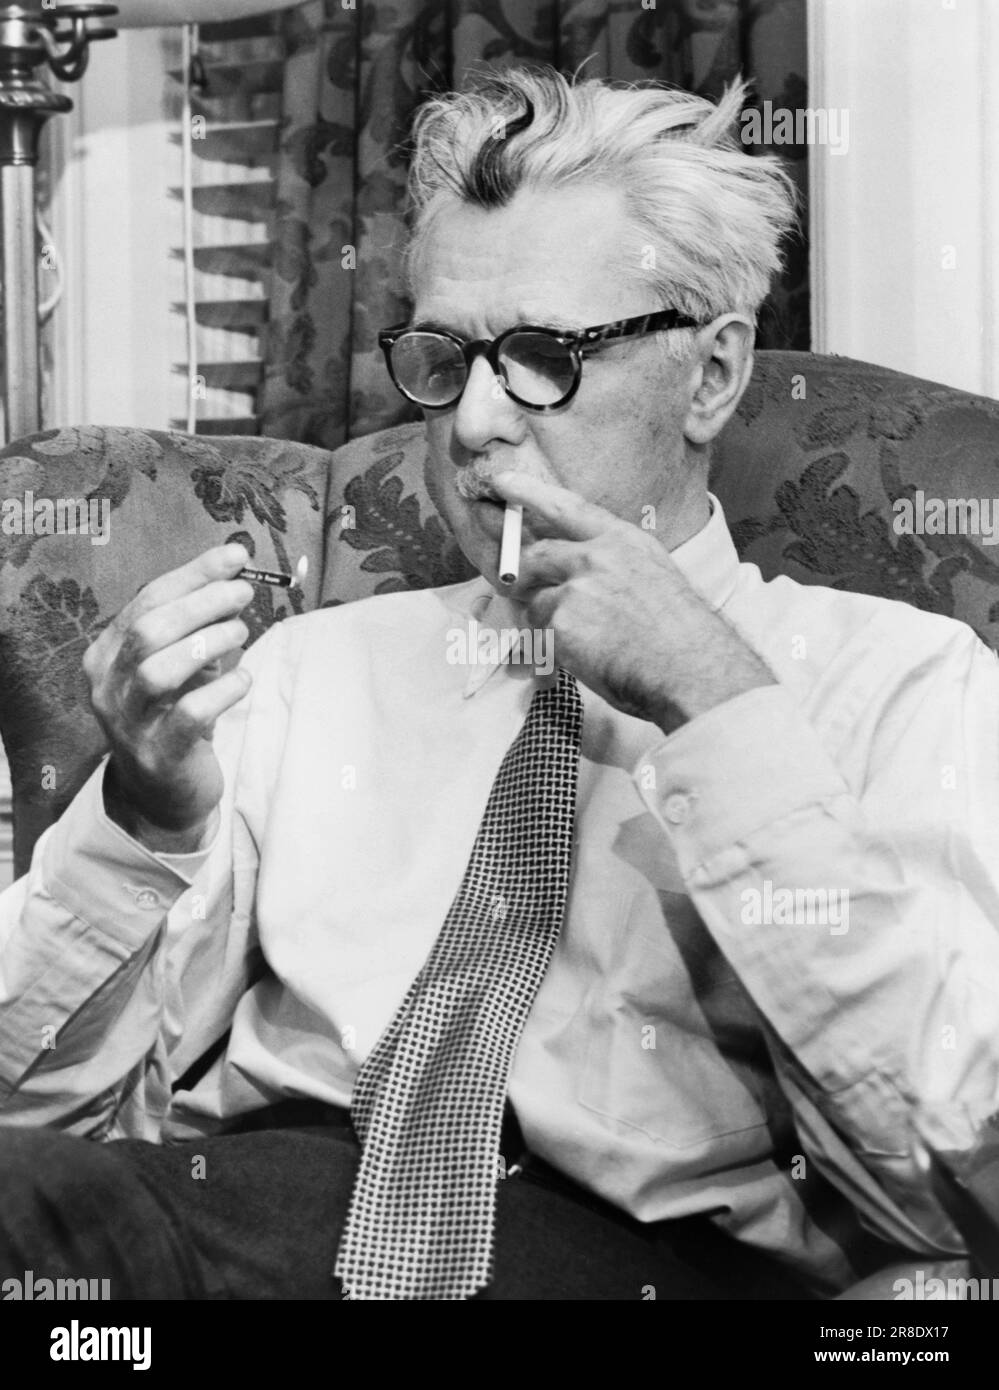 New York, New York:  1954 Noted author, cartoonist and humorist James Thurber sitting in a chair lighting a cigarette. Stock Photo